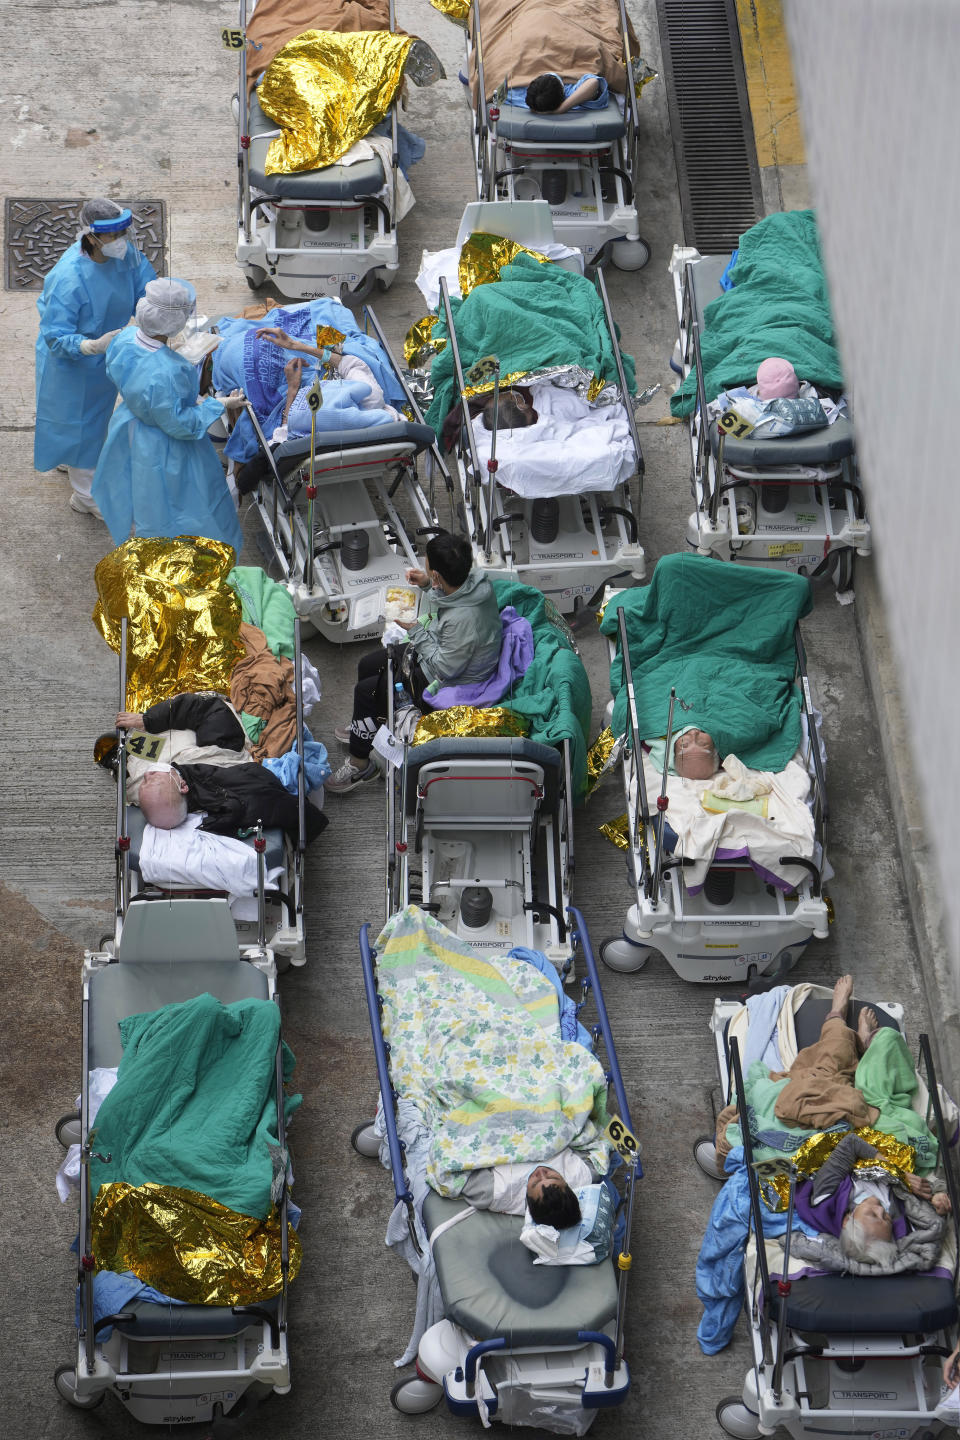 Patients lie on hospital beds as they wait at a temporary holding area outside Caritas Medical Centre in Hong Kong Wednesday, Feb. 16, 2022. There was visible evidence that Hong Kong hospitals were becoming overwhelmed by the latest COVID surge, with patients on stretchers and in tents being seen to by medical personnel on Wednesday outside the Caritas hospital. (AP Photo Vincent Yu)